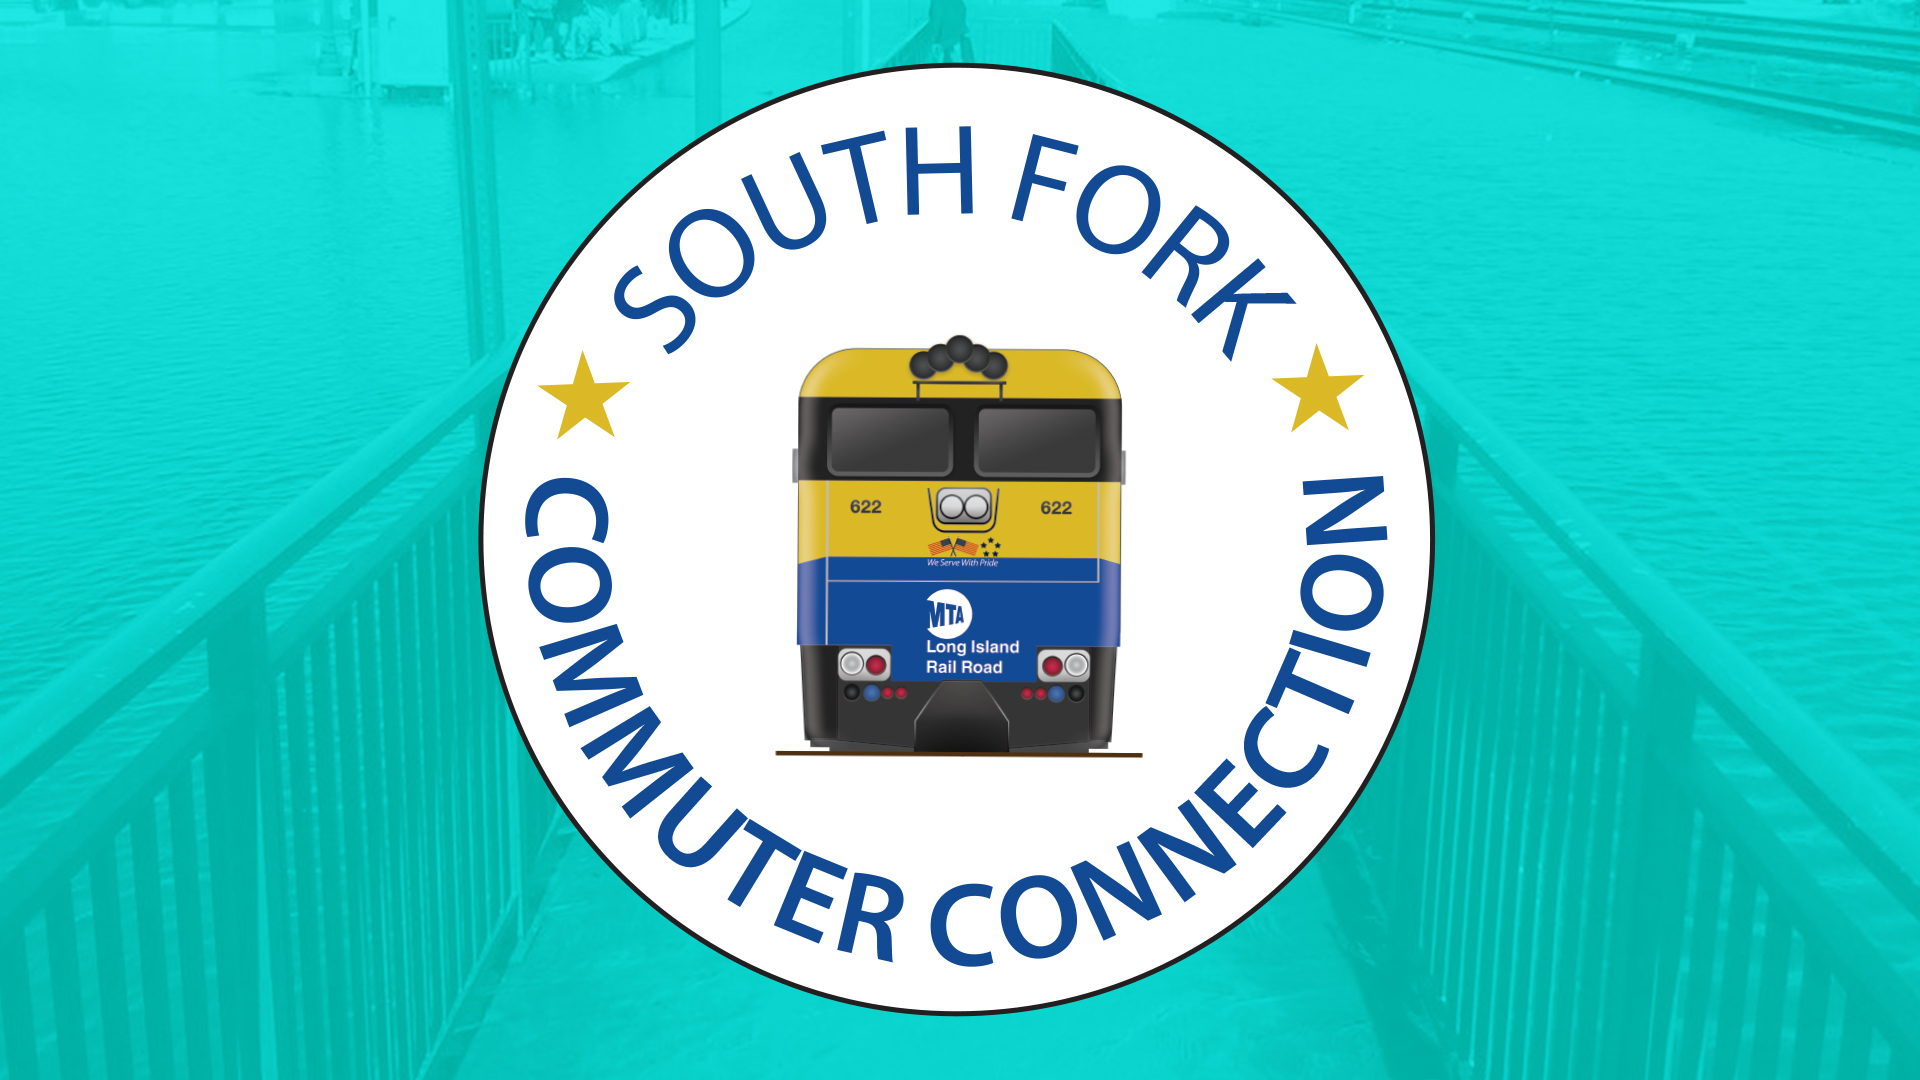 ICYMI: SOUTH FORK COMMUTER CONNECTION SERVICE TO RESUME SEPTEMBER 7